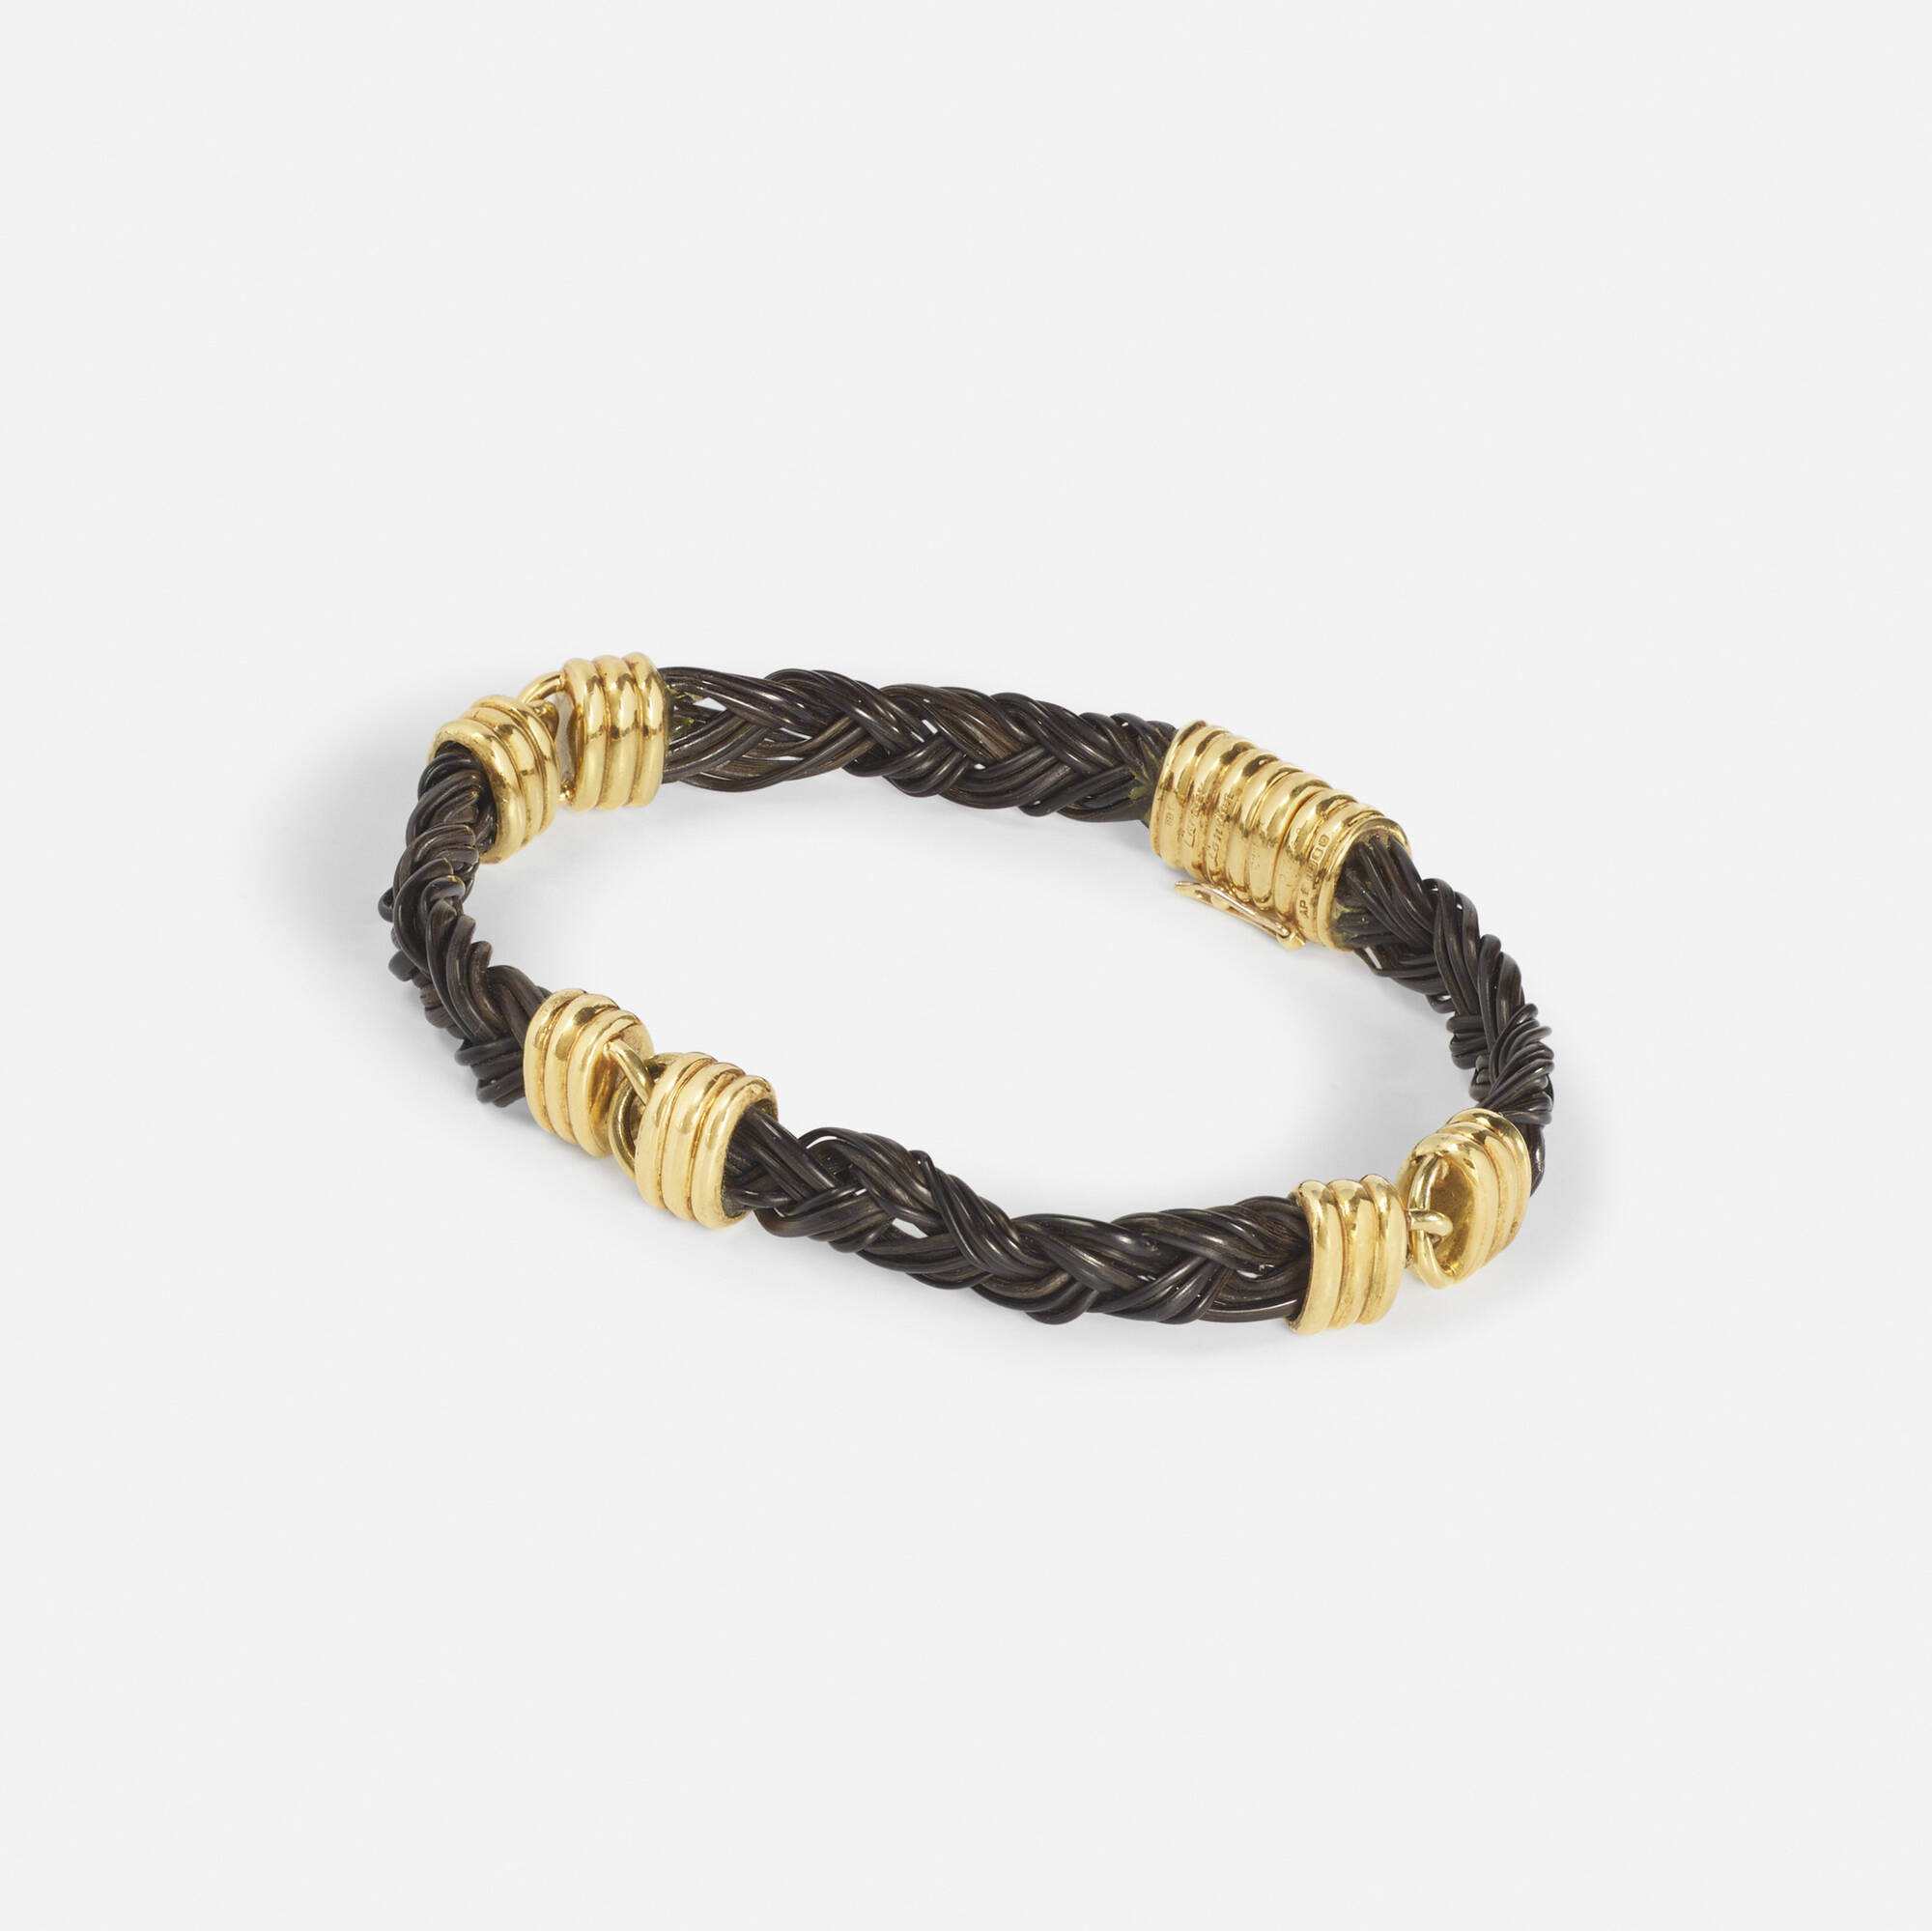 162: CARTIER, A gold and elephant hair bracelet < Jewels, 21 April 2016 <  Auctions | Wright: Auctions of Art and Design